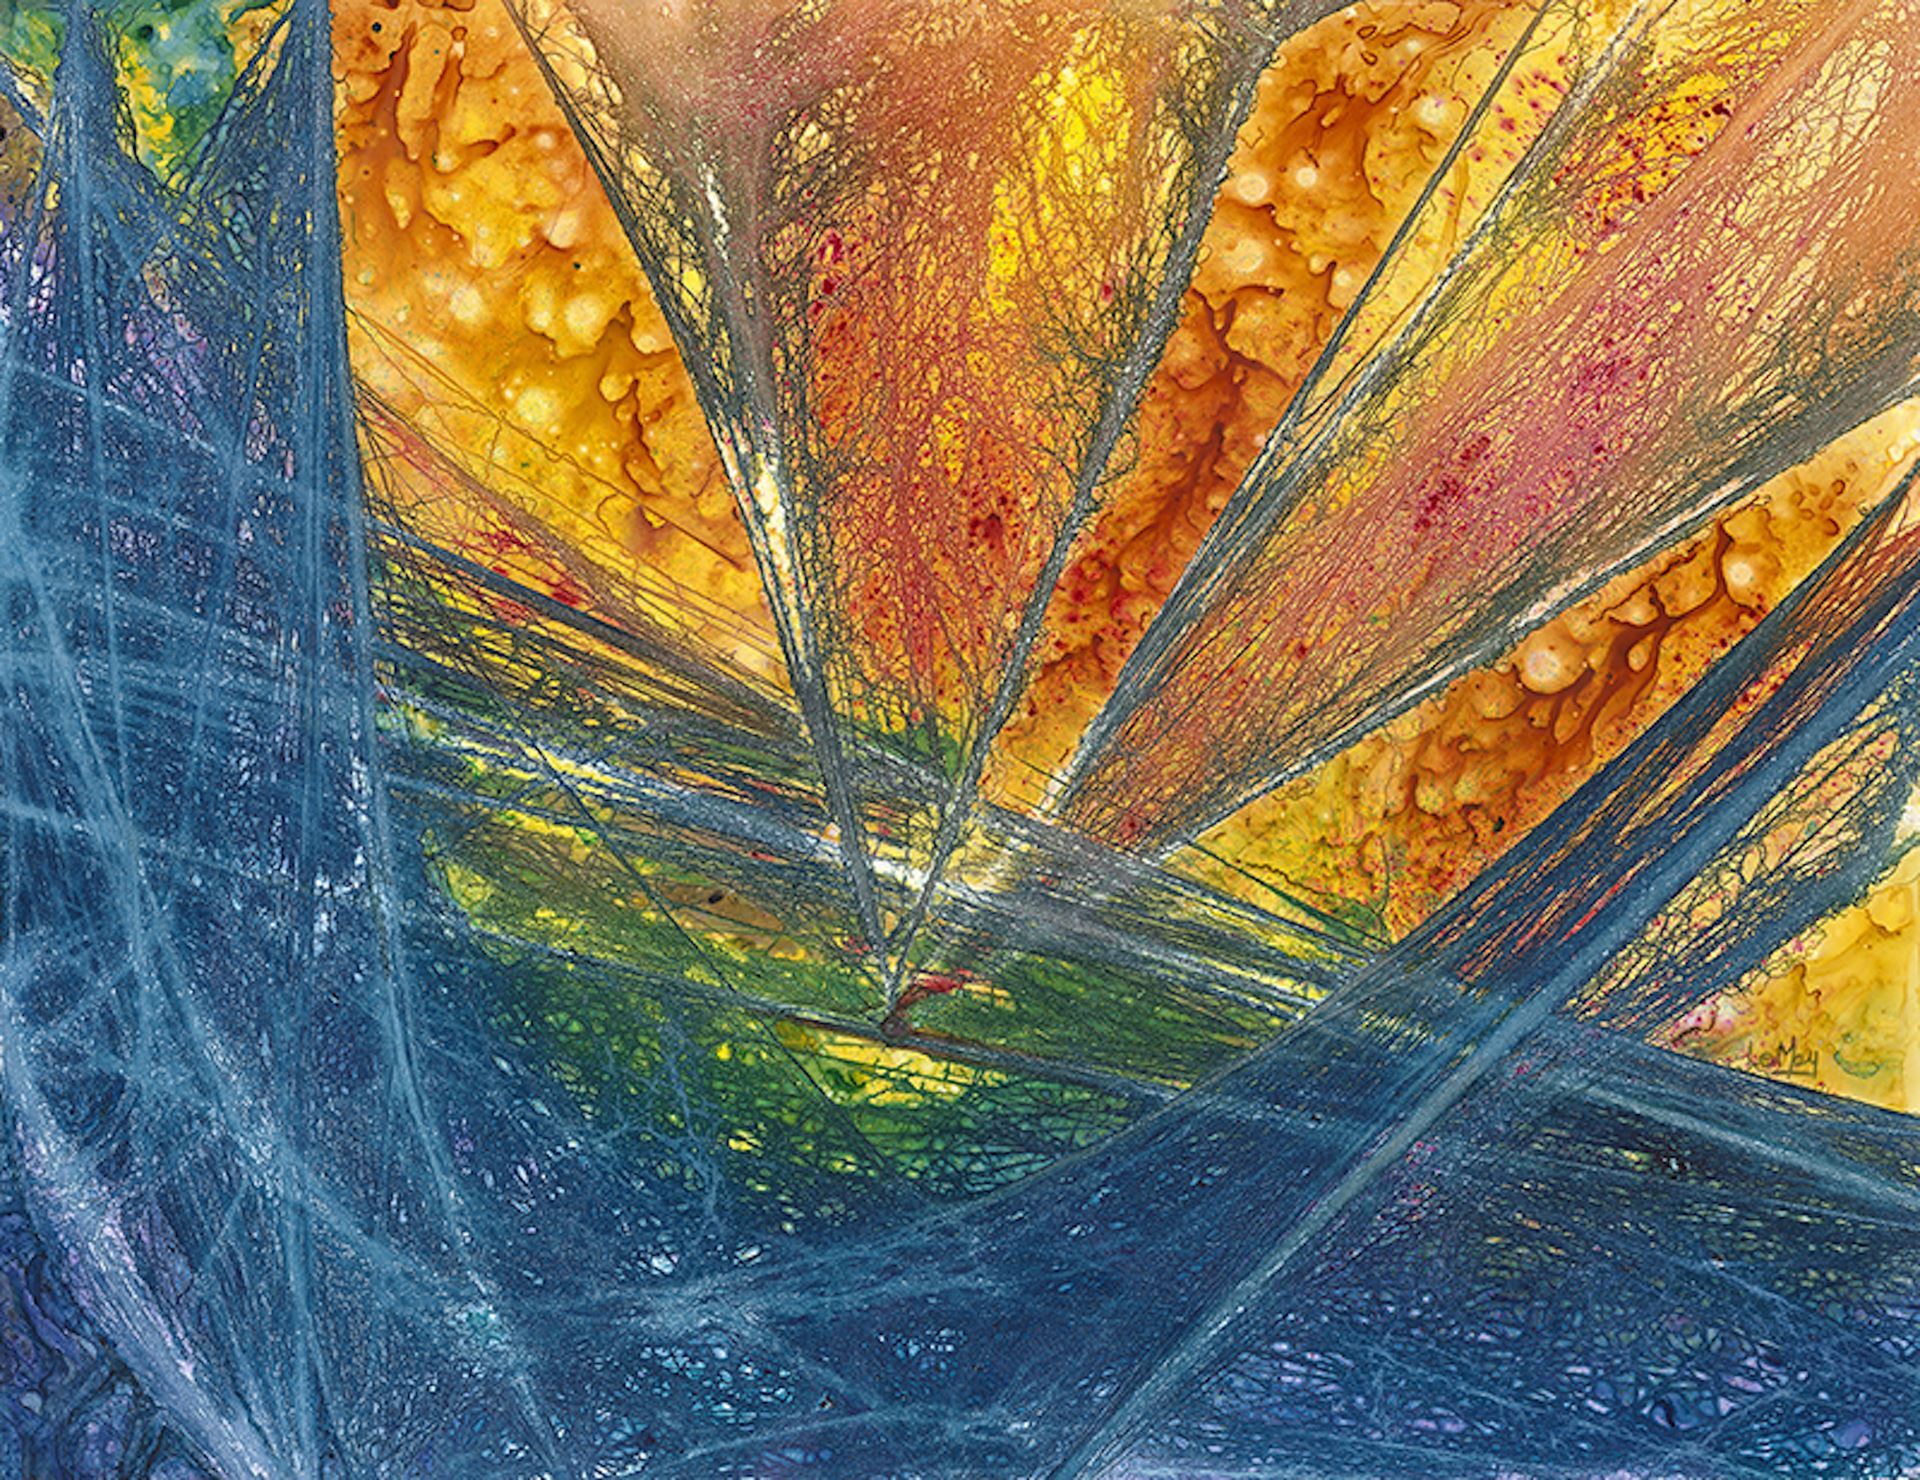 Abstract watermedia painting with dynamic threadlike lines in blue and green with textured yellow and orange background